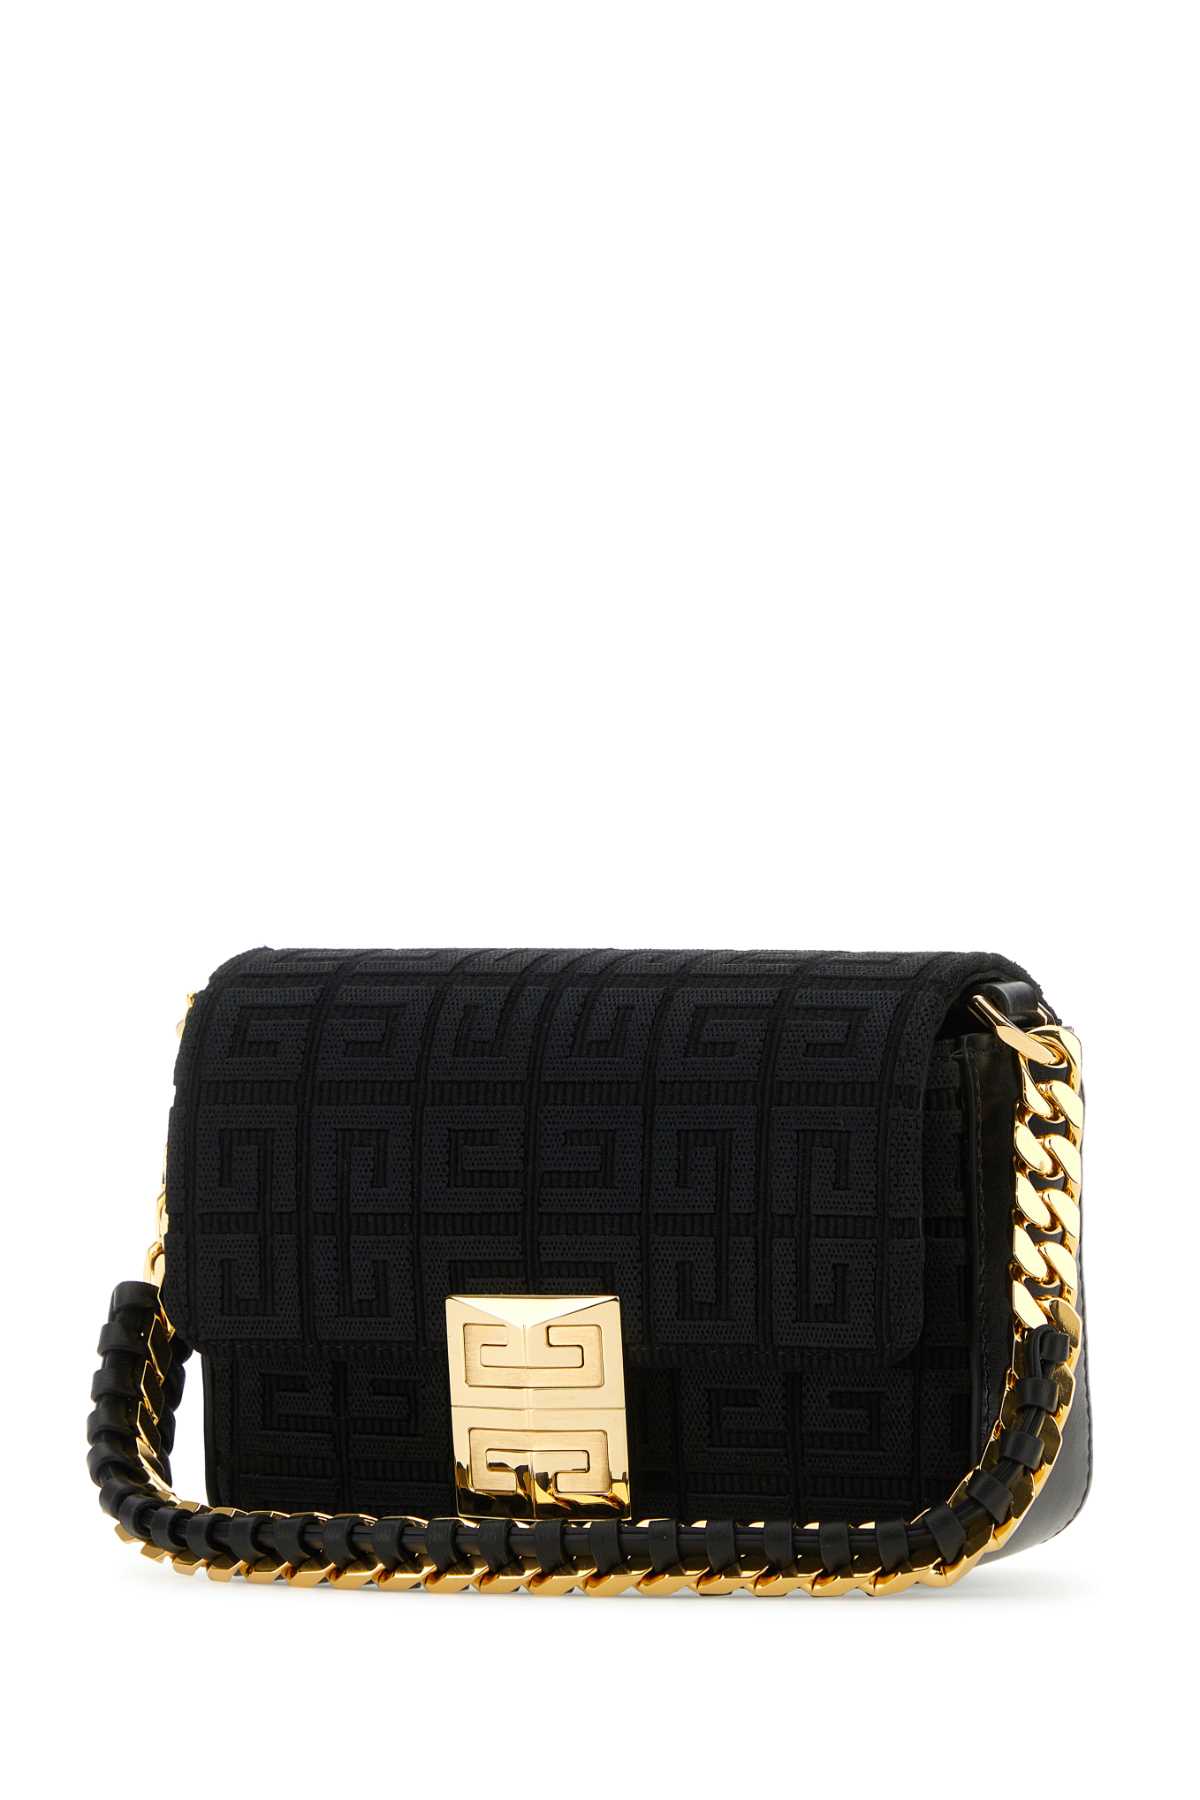 Givenchy Embroidered Canvas 4g Handbag In Black